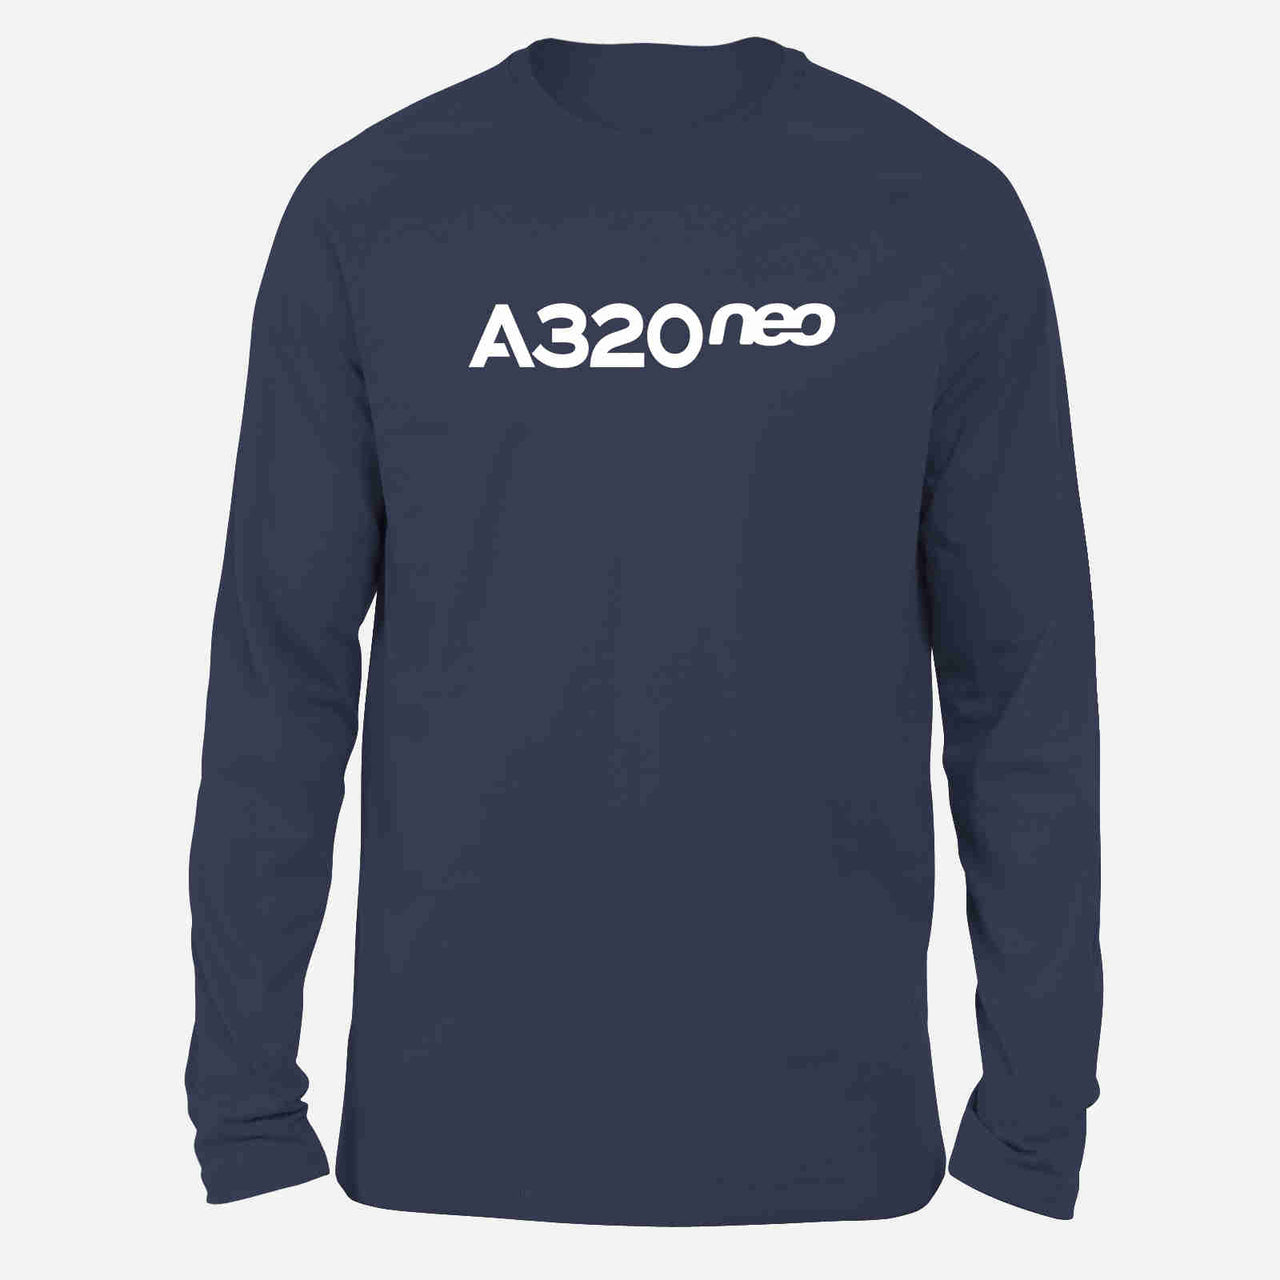 A320neo & Text Designed Long-Sleeve T-Shirts